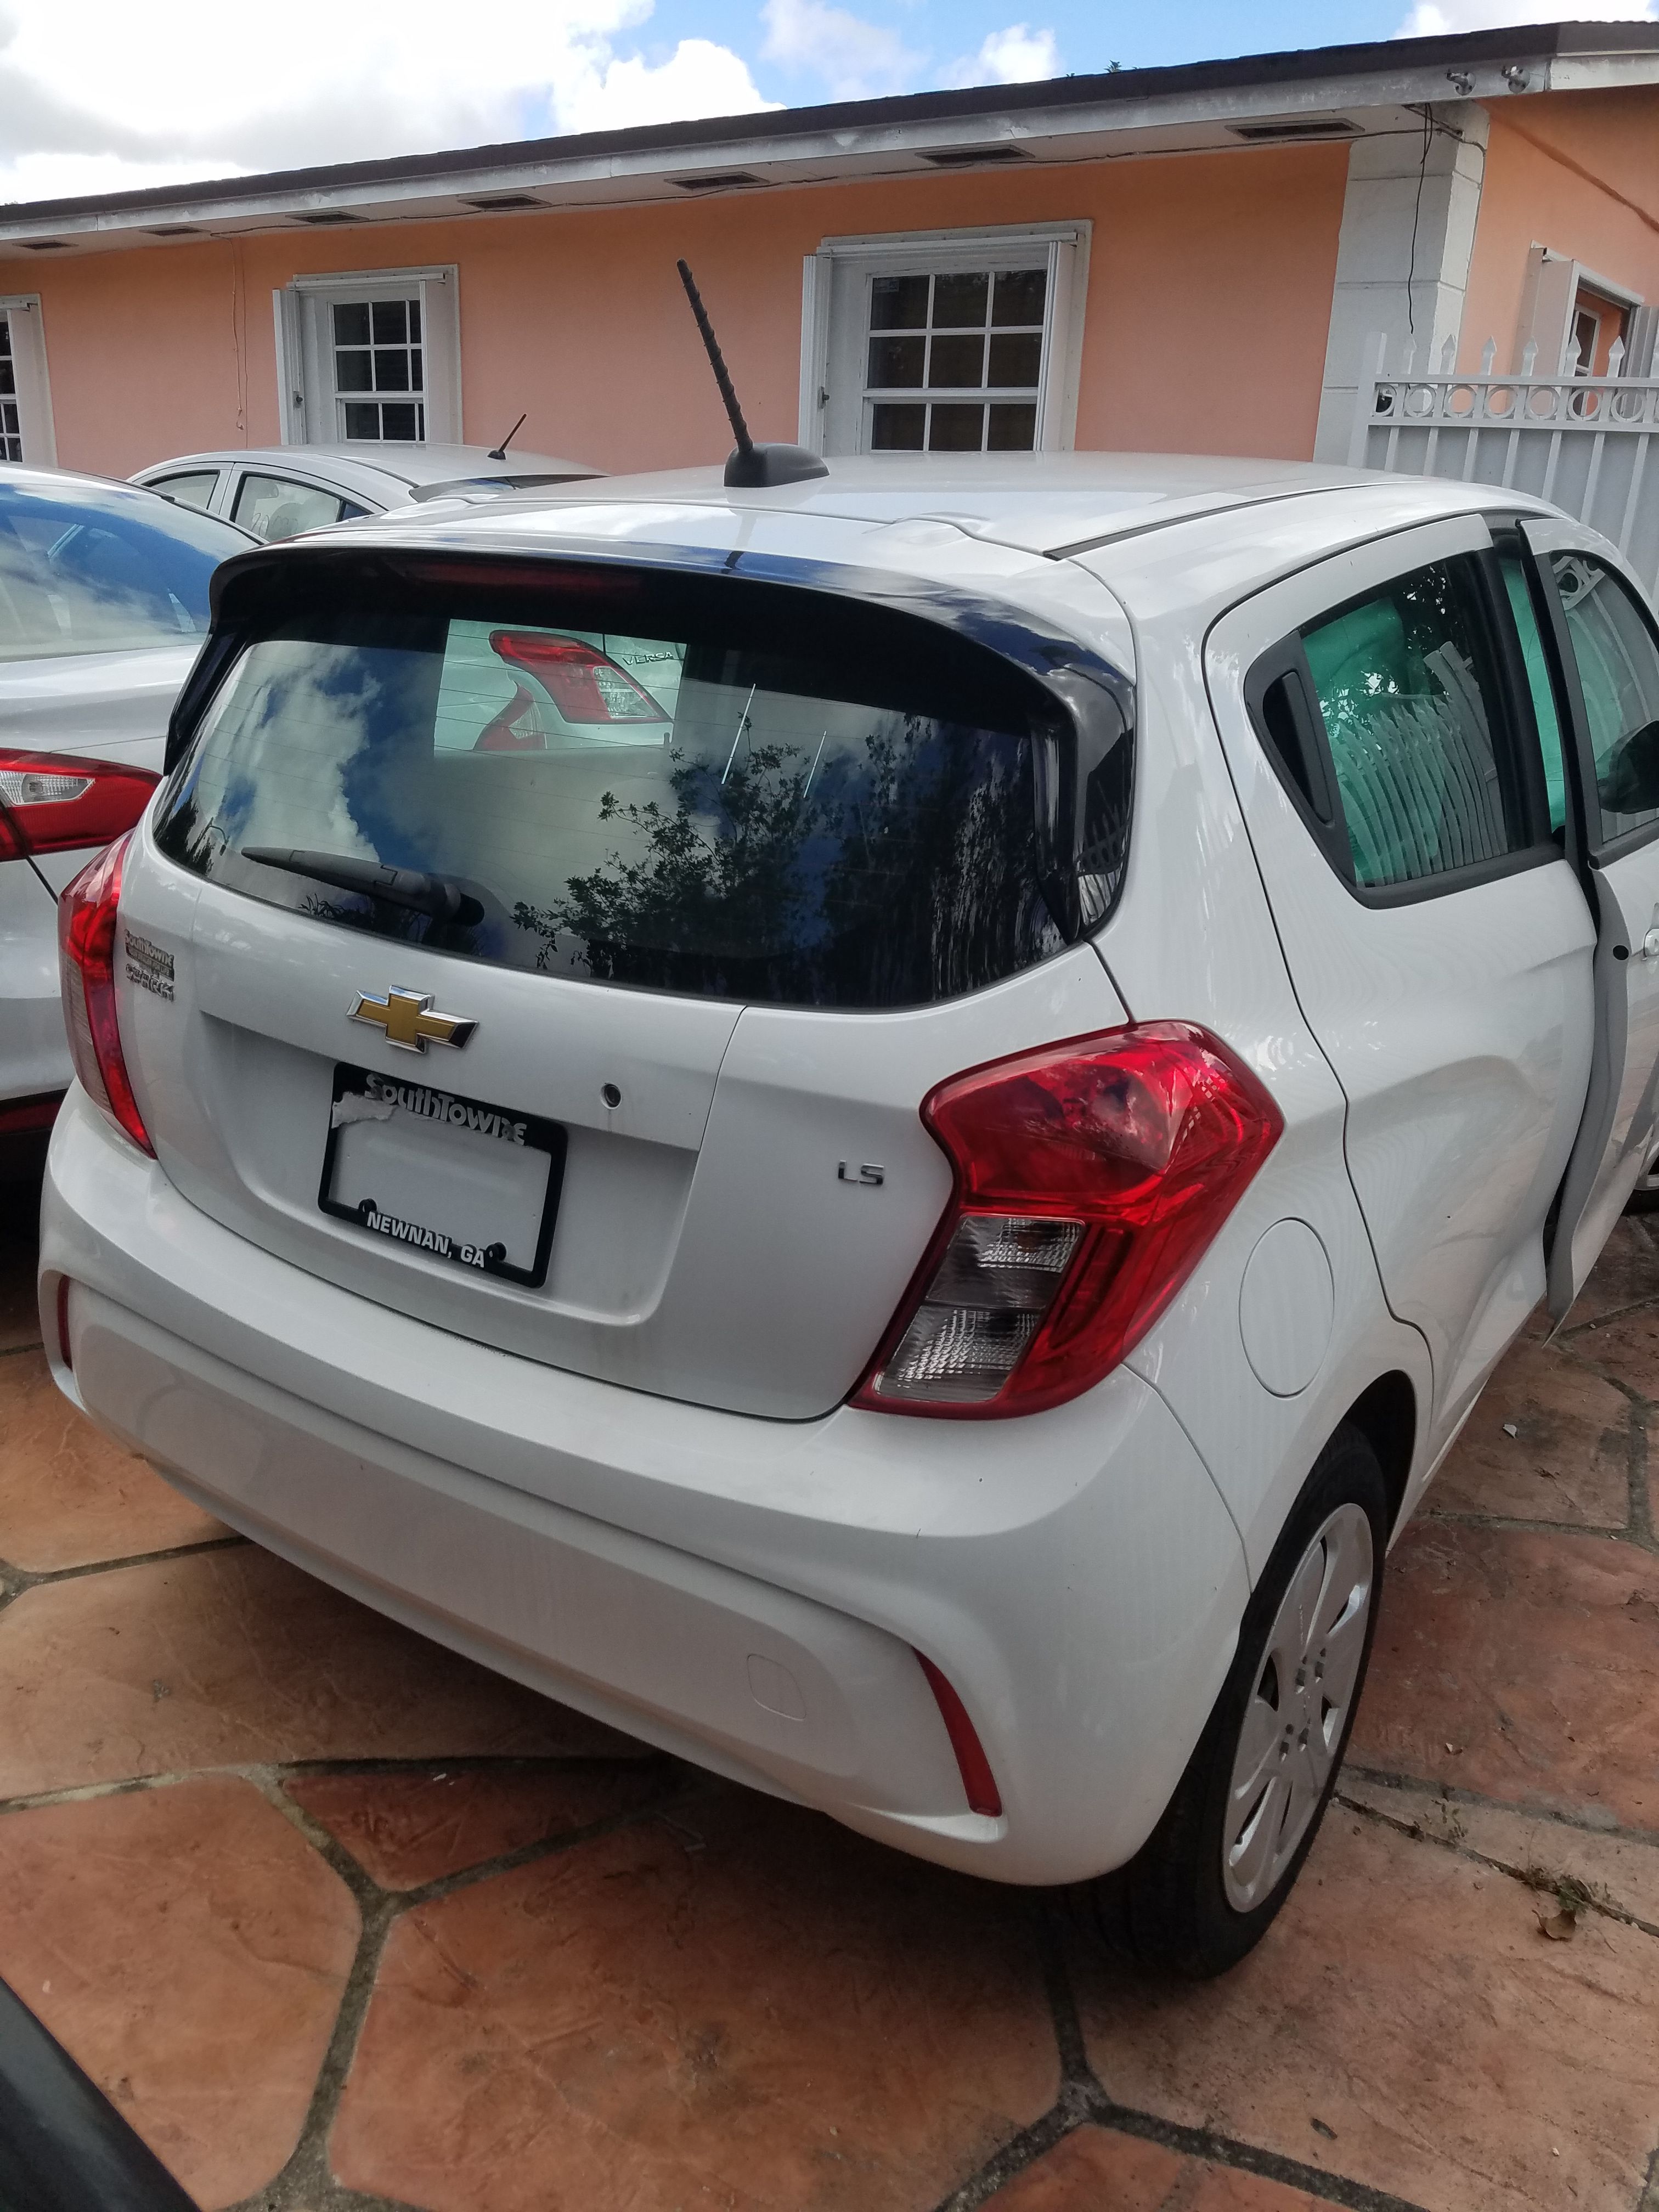 2016 chevy spark (parts)